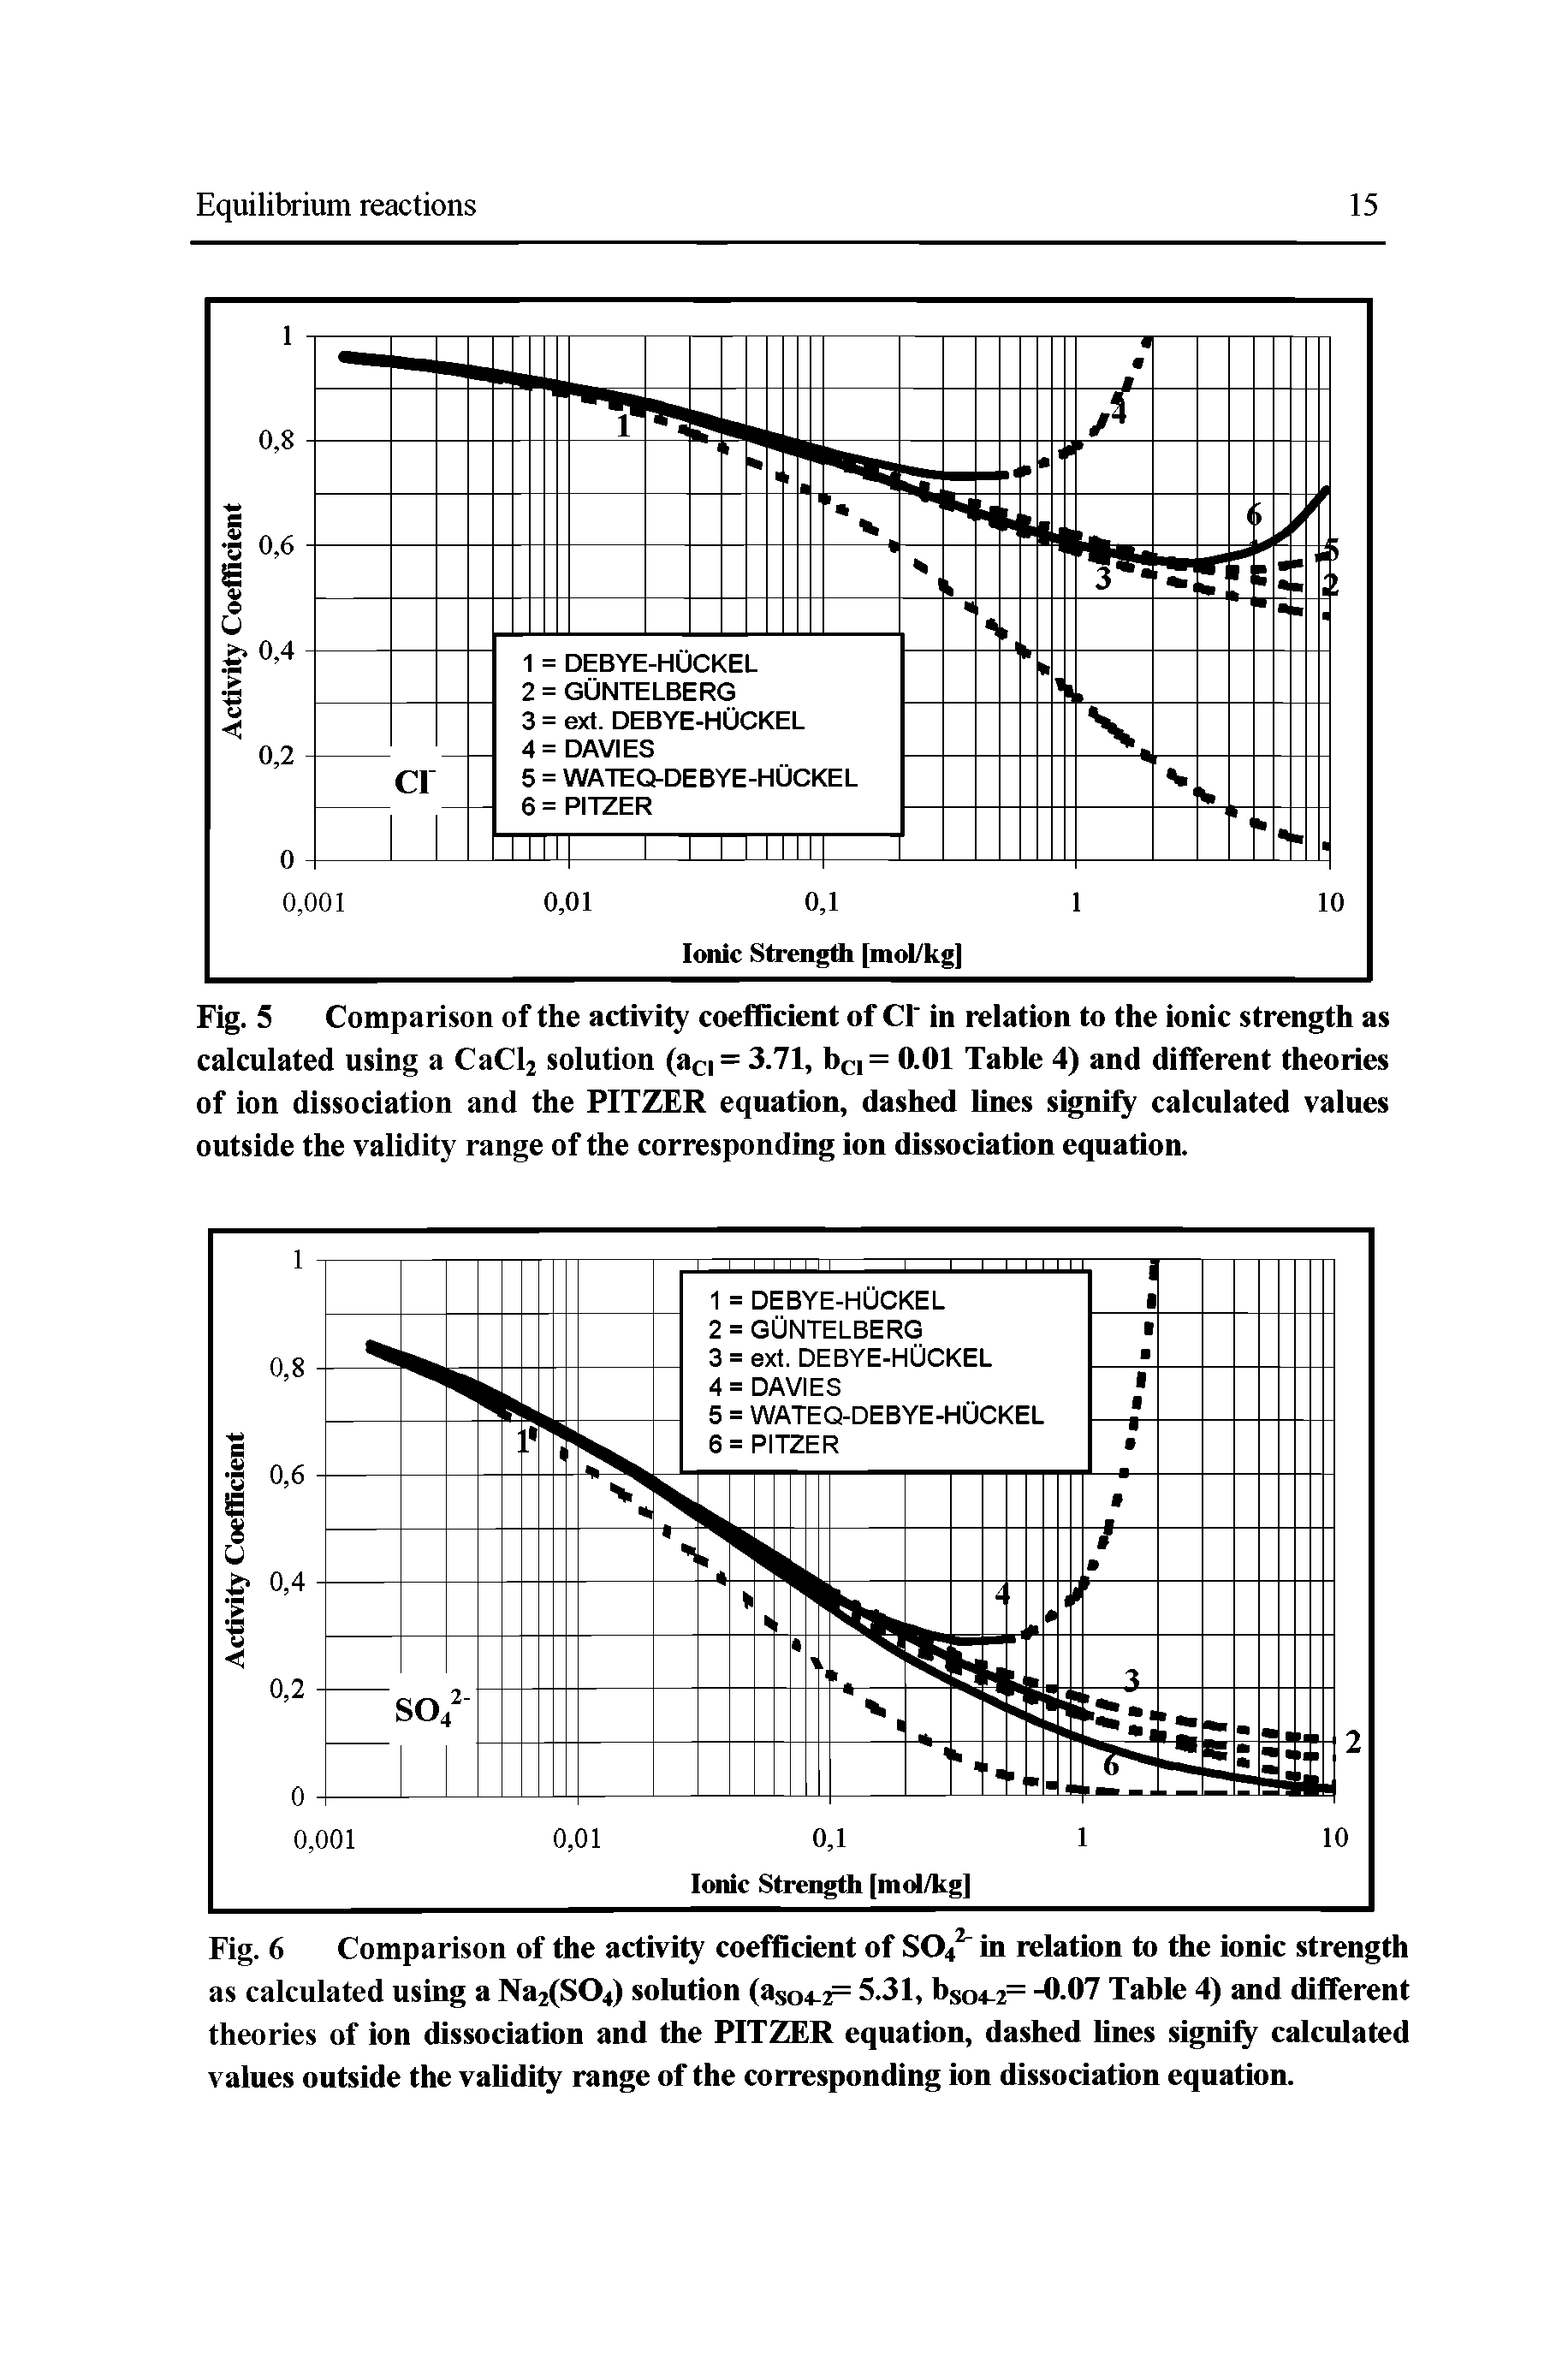 Fig. 6 Comparison of the activity coefficient of SO42" in relation to the ionic strength as calculated using a Na2(S04) solution (aS04-2= 5.31, bS04-2= -0 07 Table 4) and different theories of ion dissociation and the PITZER equation, dashed lines signify calculated values outside the validity range of the corresponding ion dissociation equation.